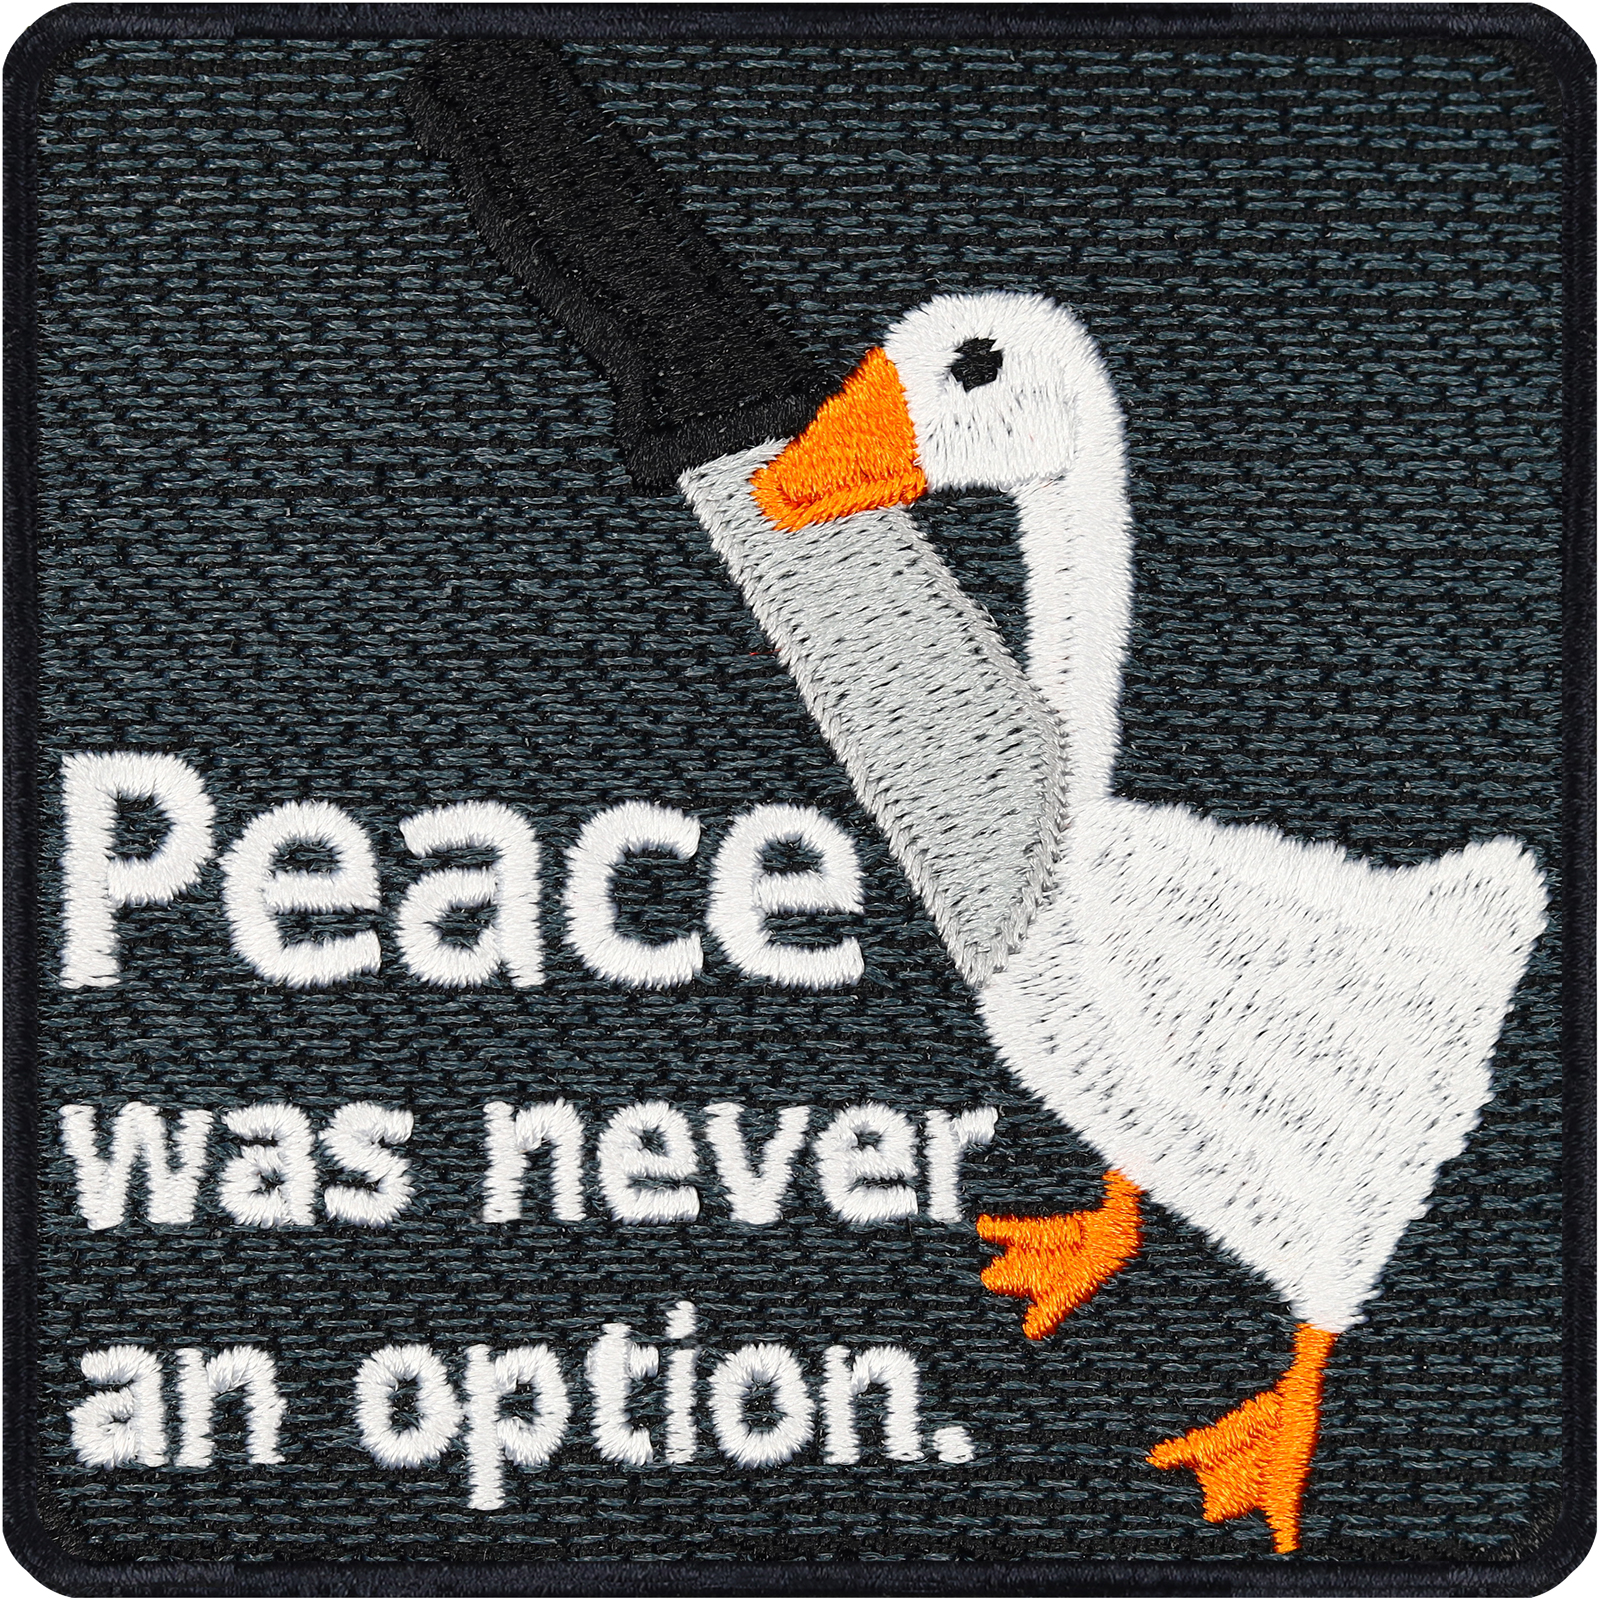 Peace was never an option - Patch